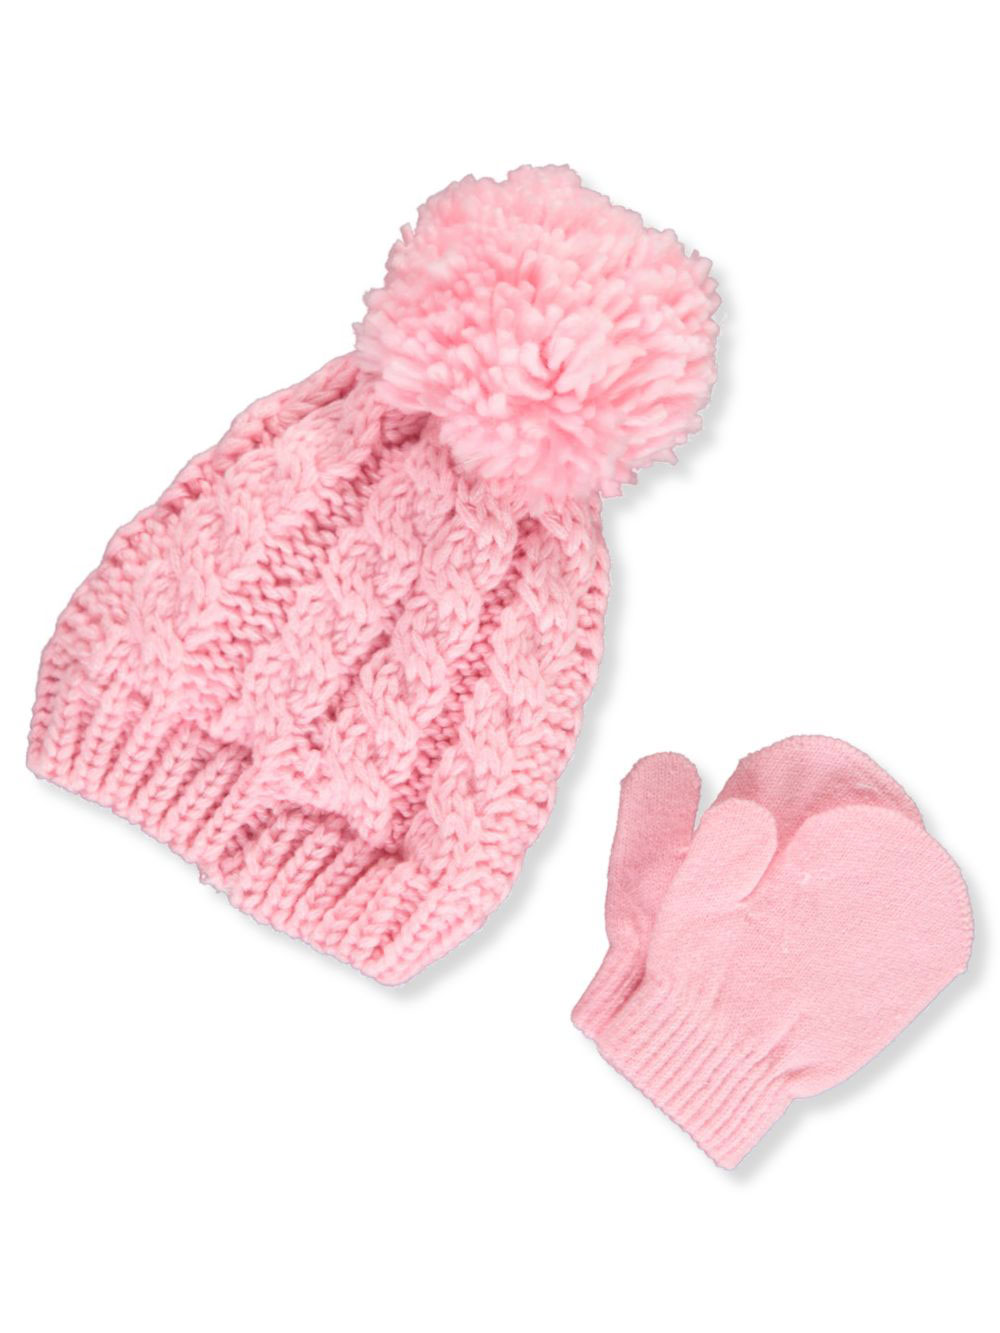 pink baby hat and mittens